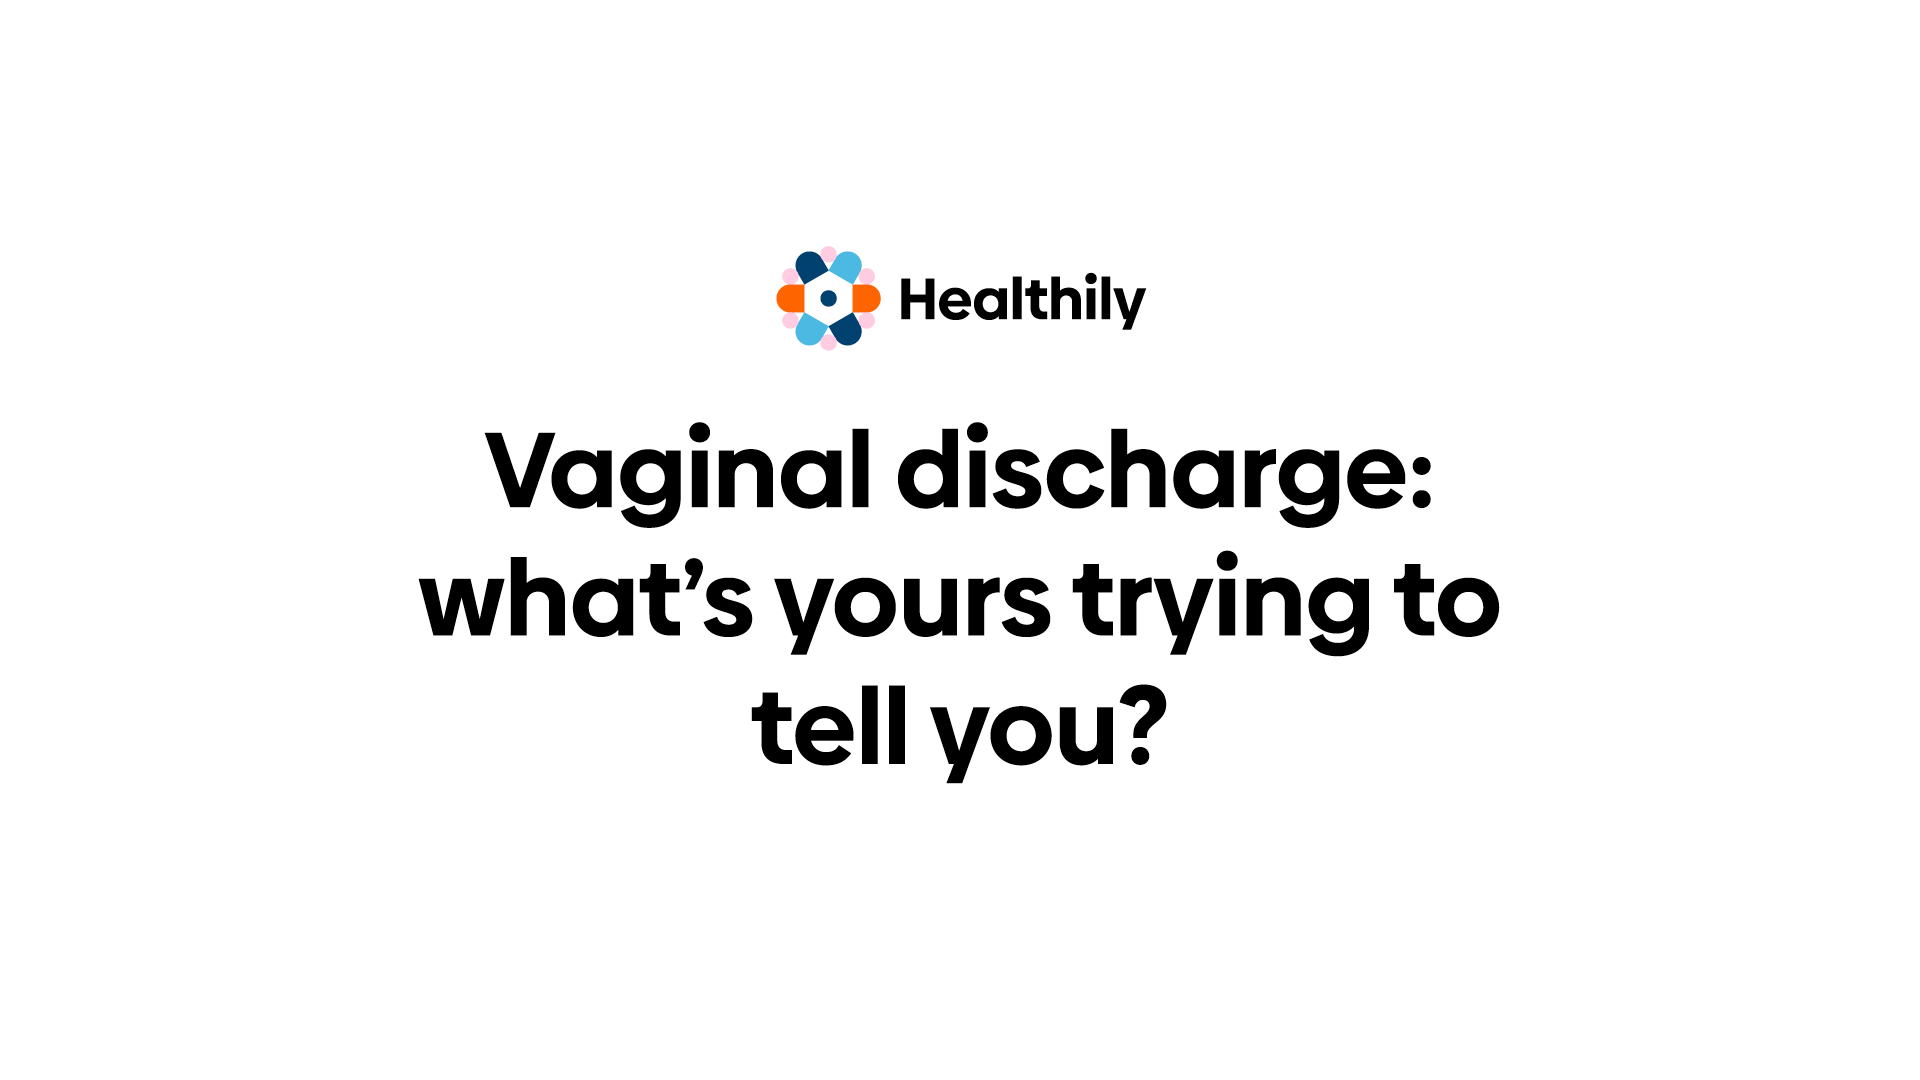 Have you ever experienced a sudden gush of fluid from your vagina? Discharge  from the vagina can be completely normal even when it seem